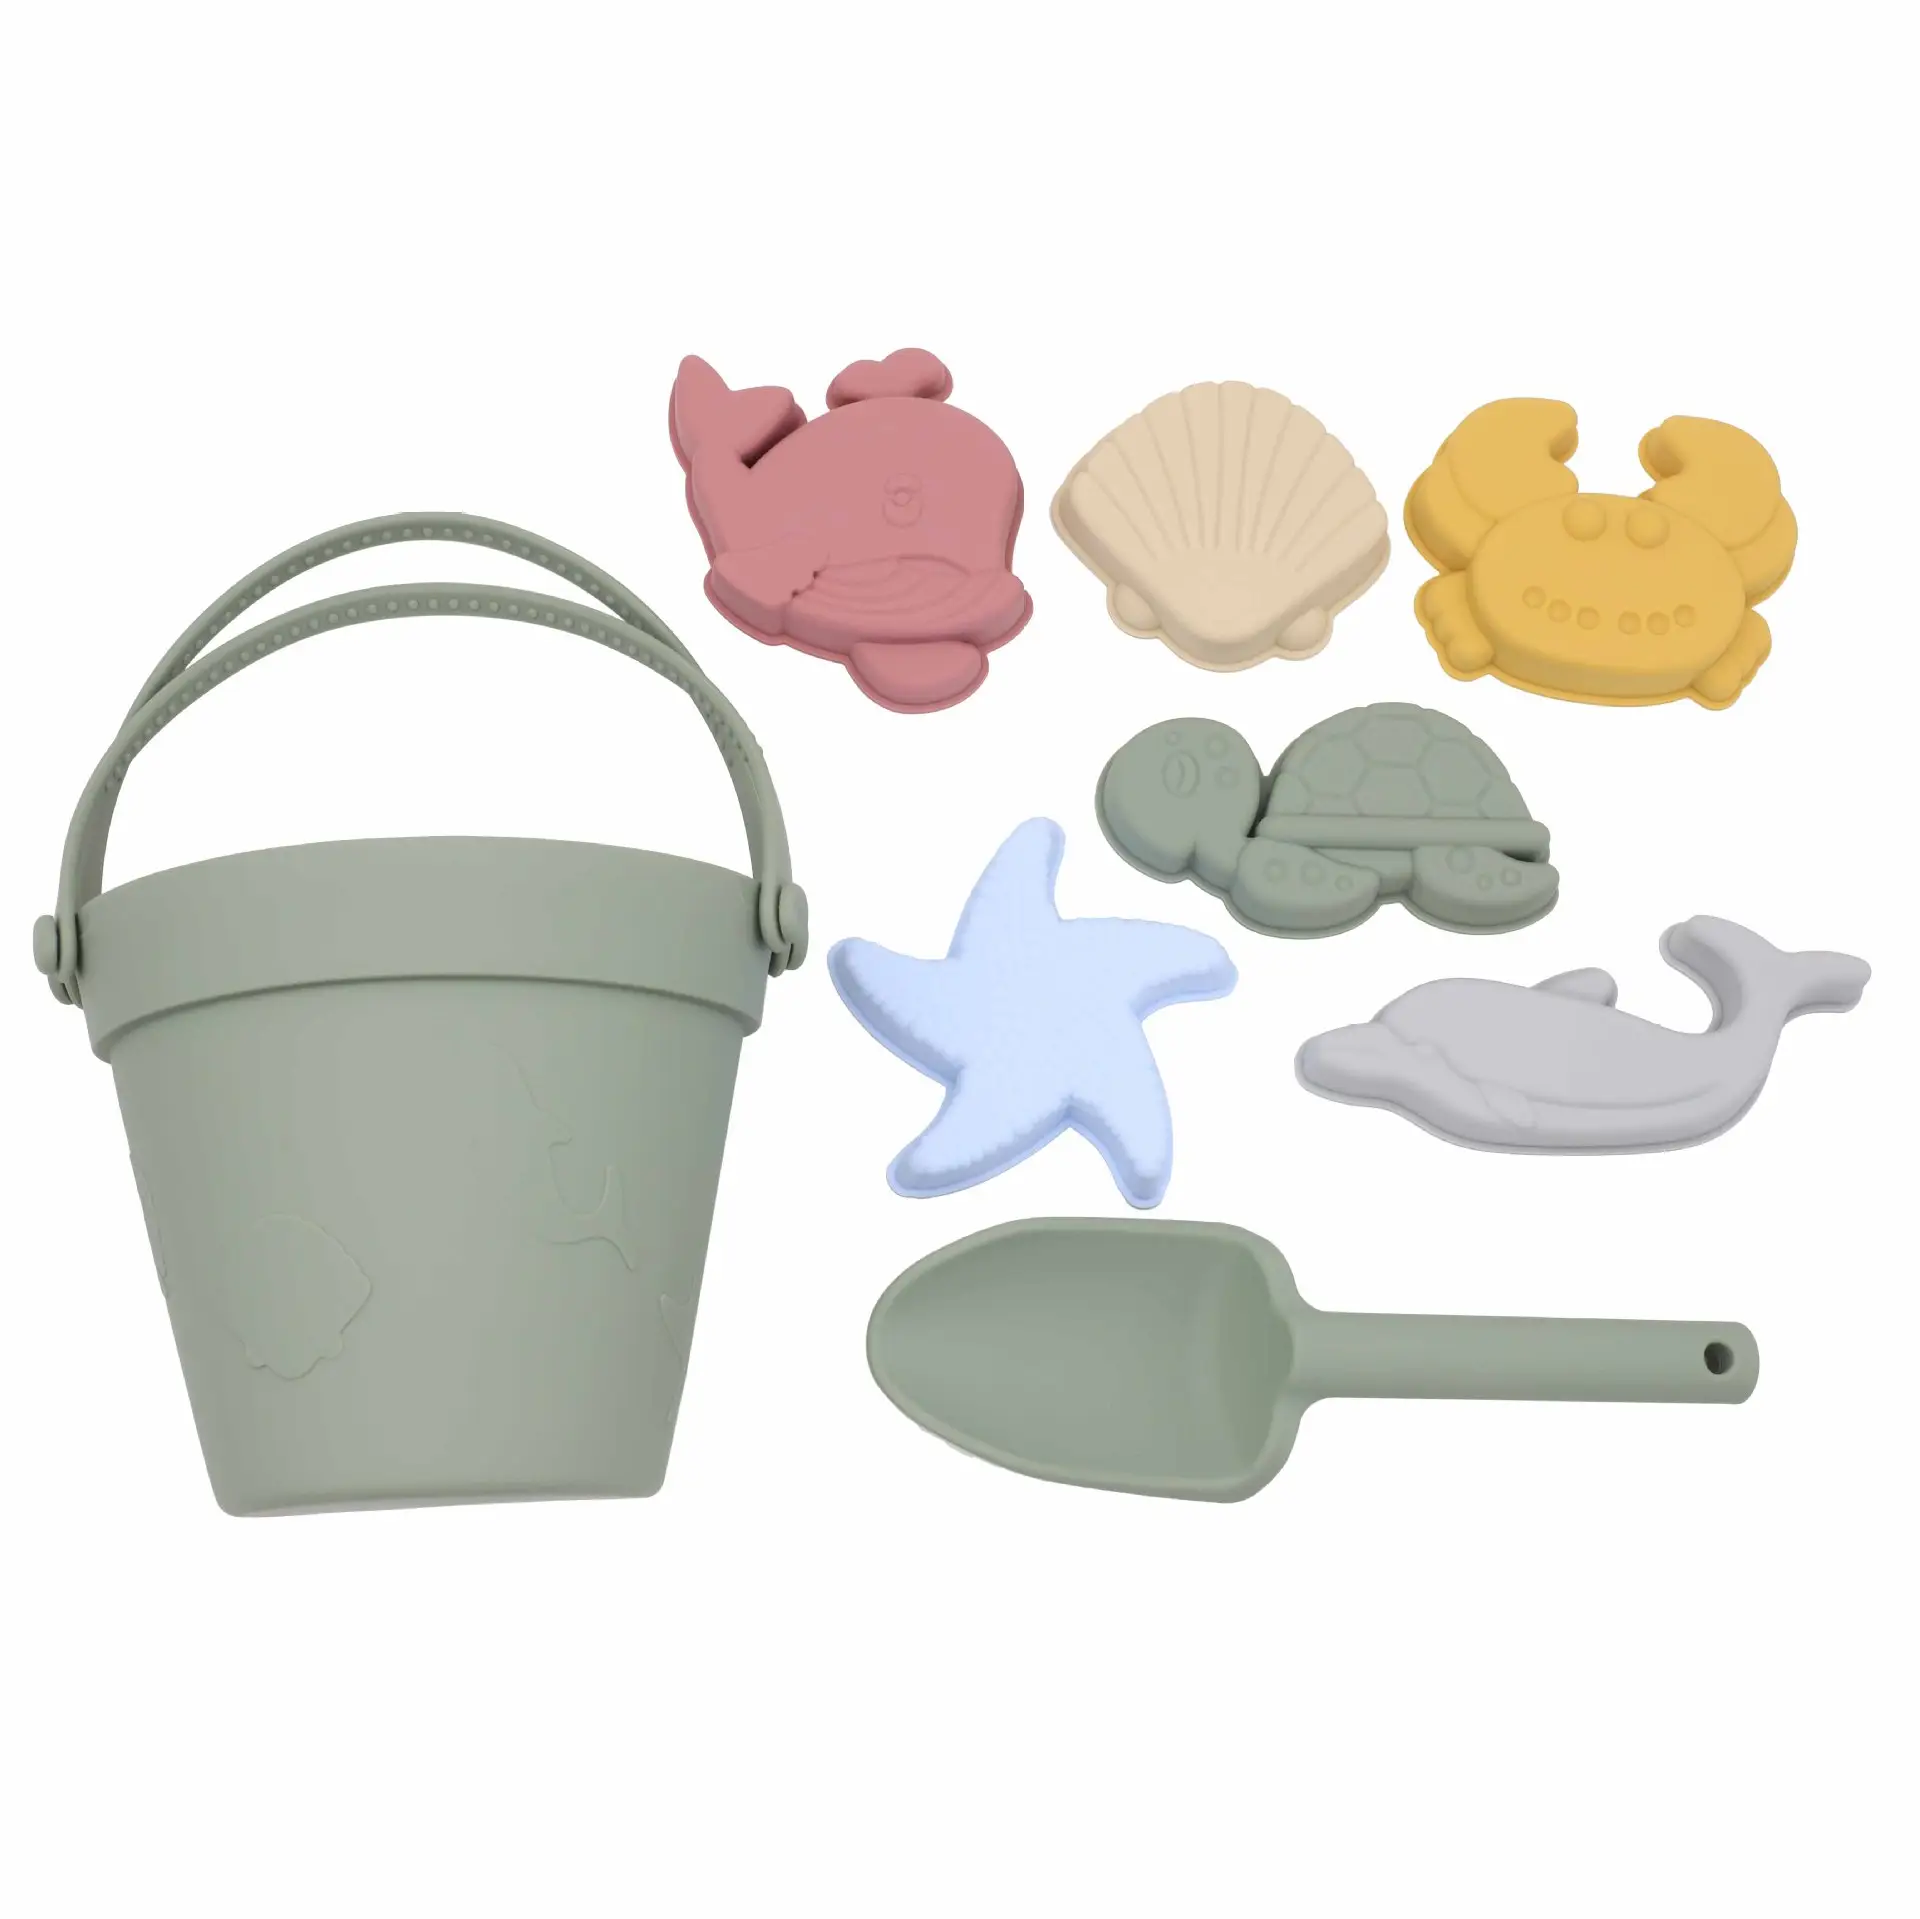 Silicone Beach Toys - Silicone Summer Kids Beach Set with Sand Toy Molds Shovel Bucket Set